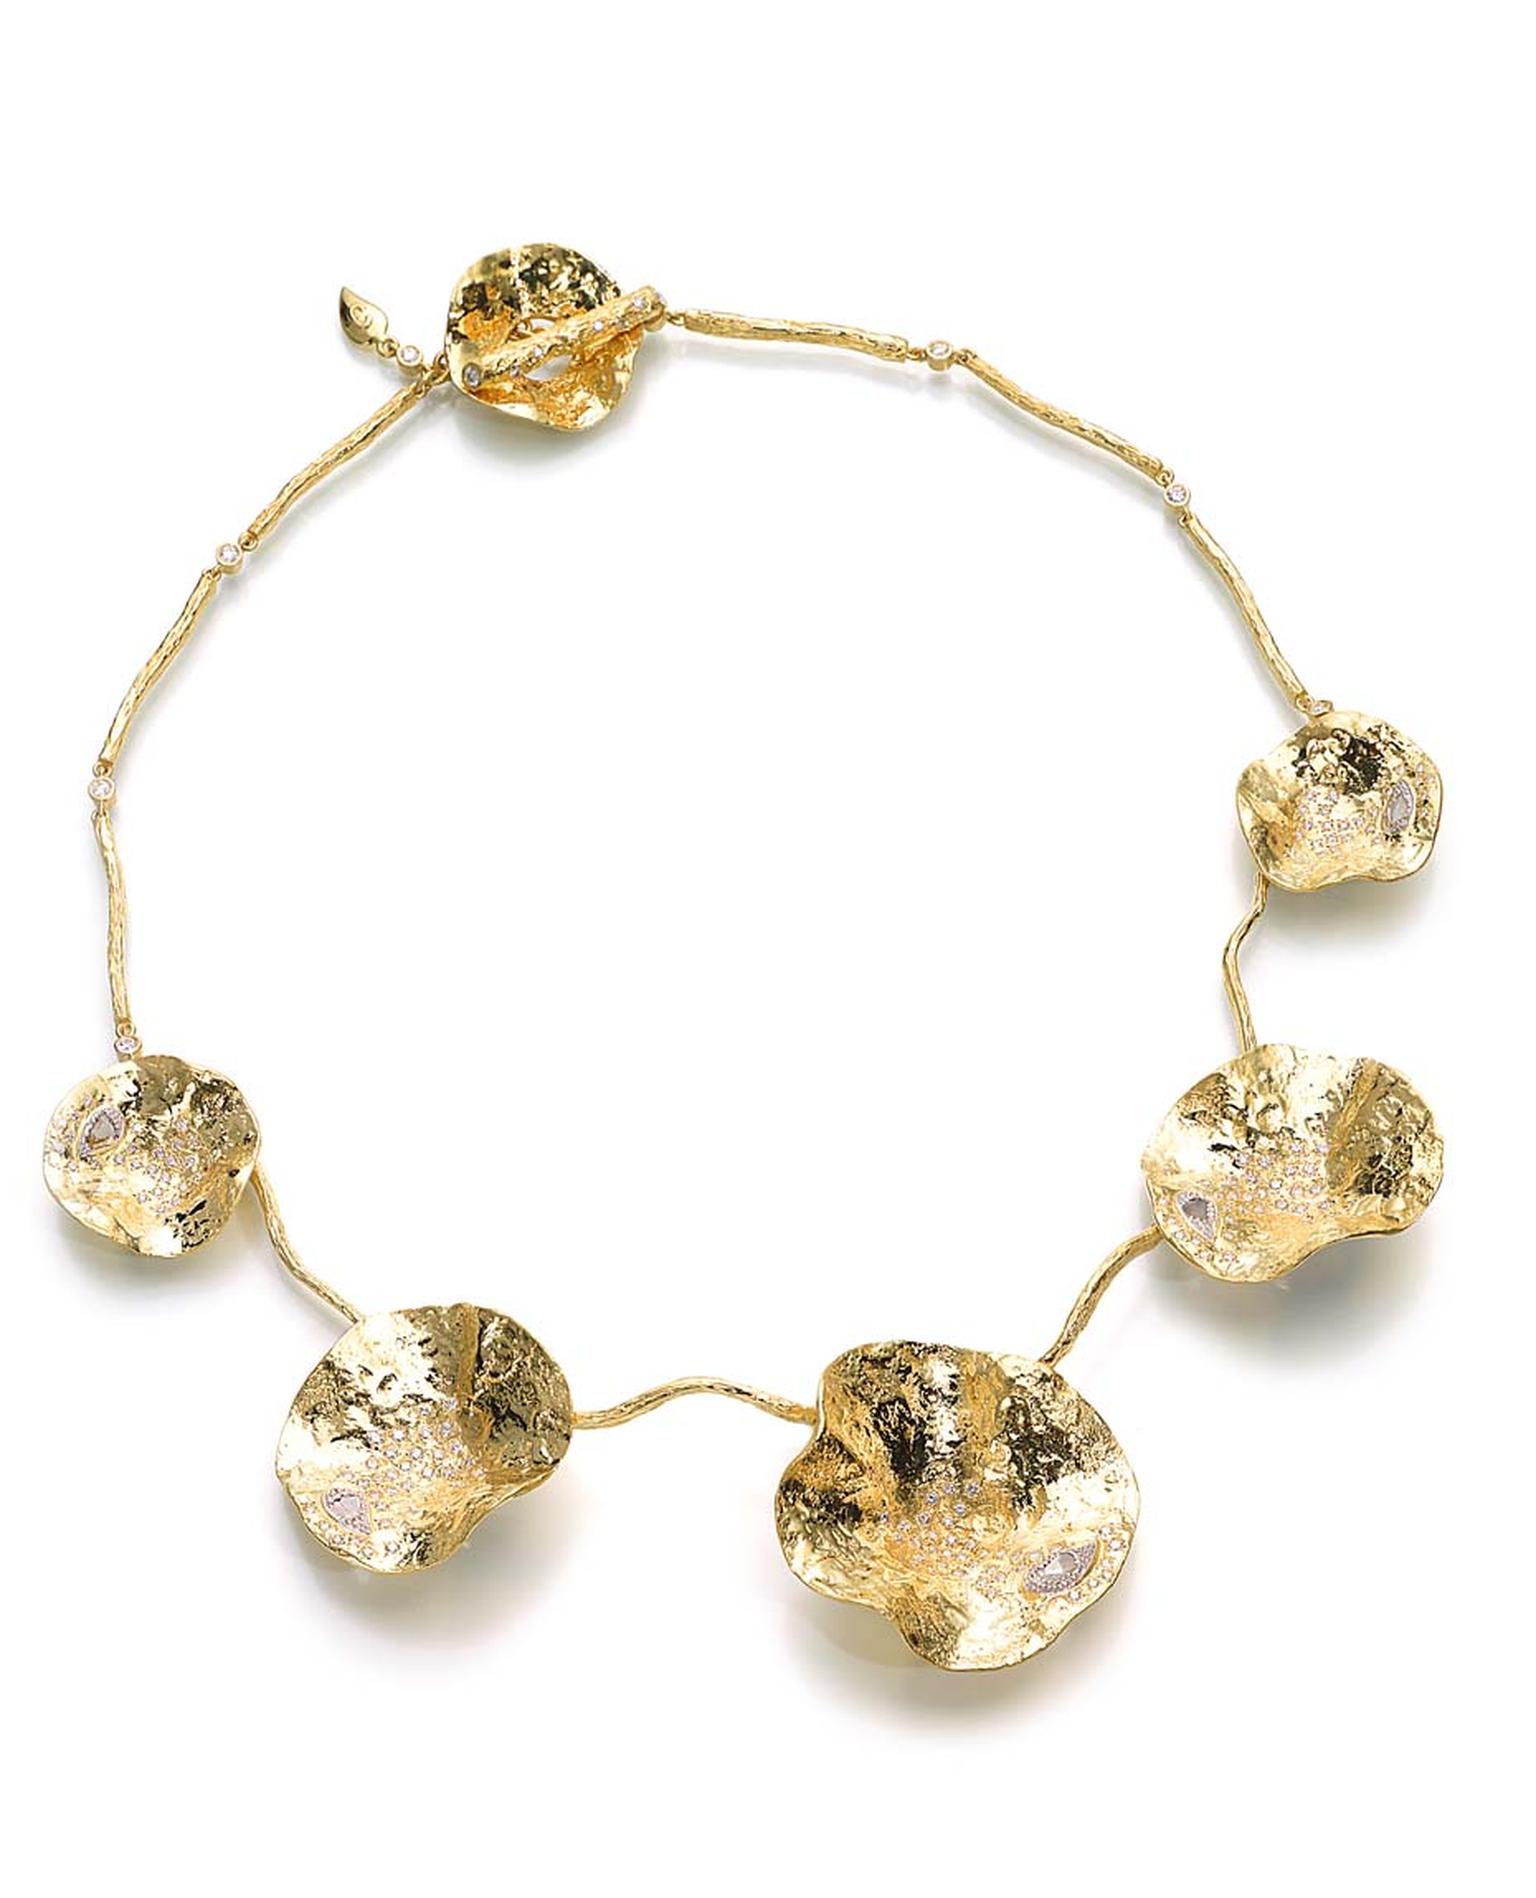 Coomi Serenity Flower bracelet with gold and rose-cut diamonds.